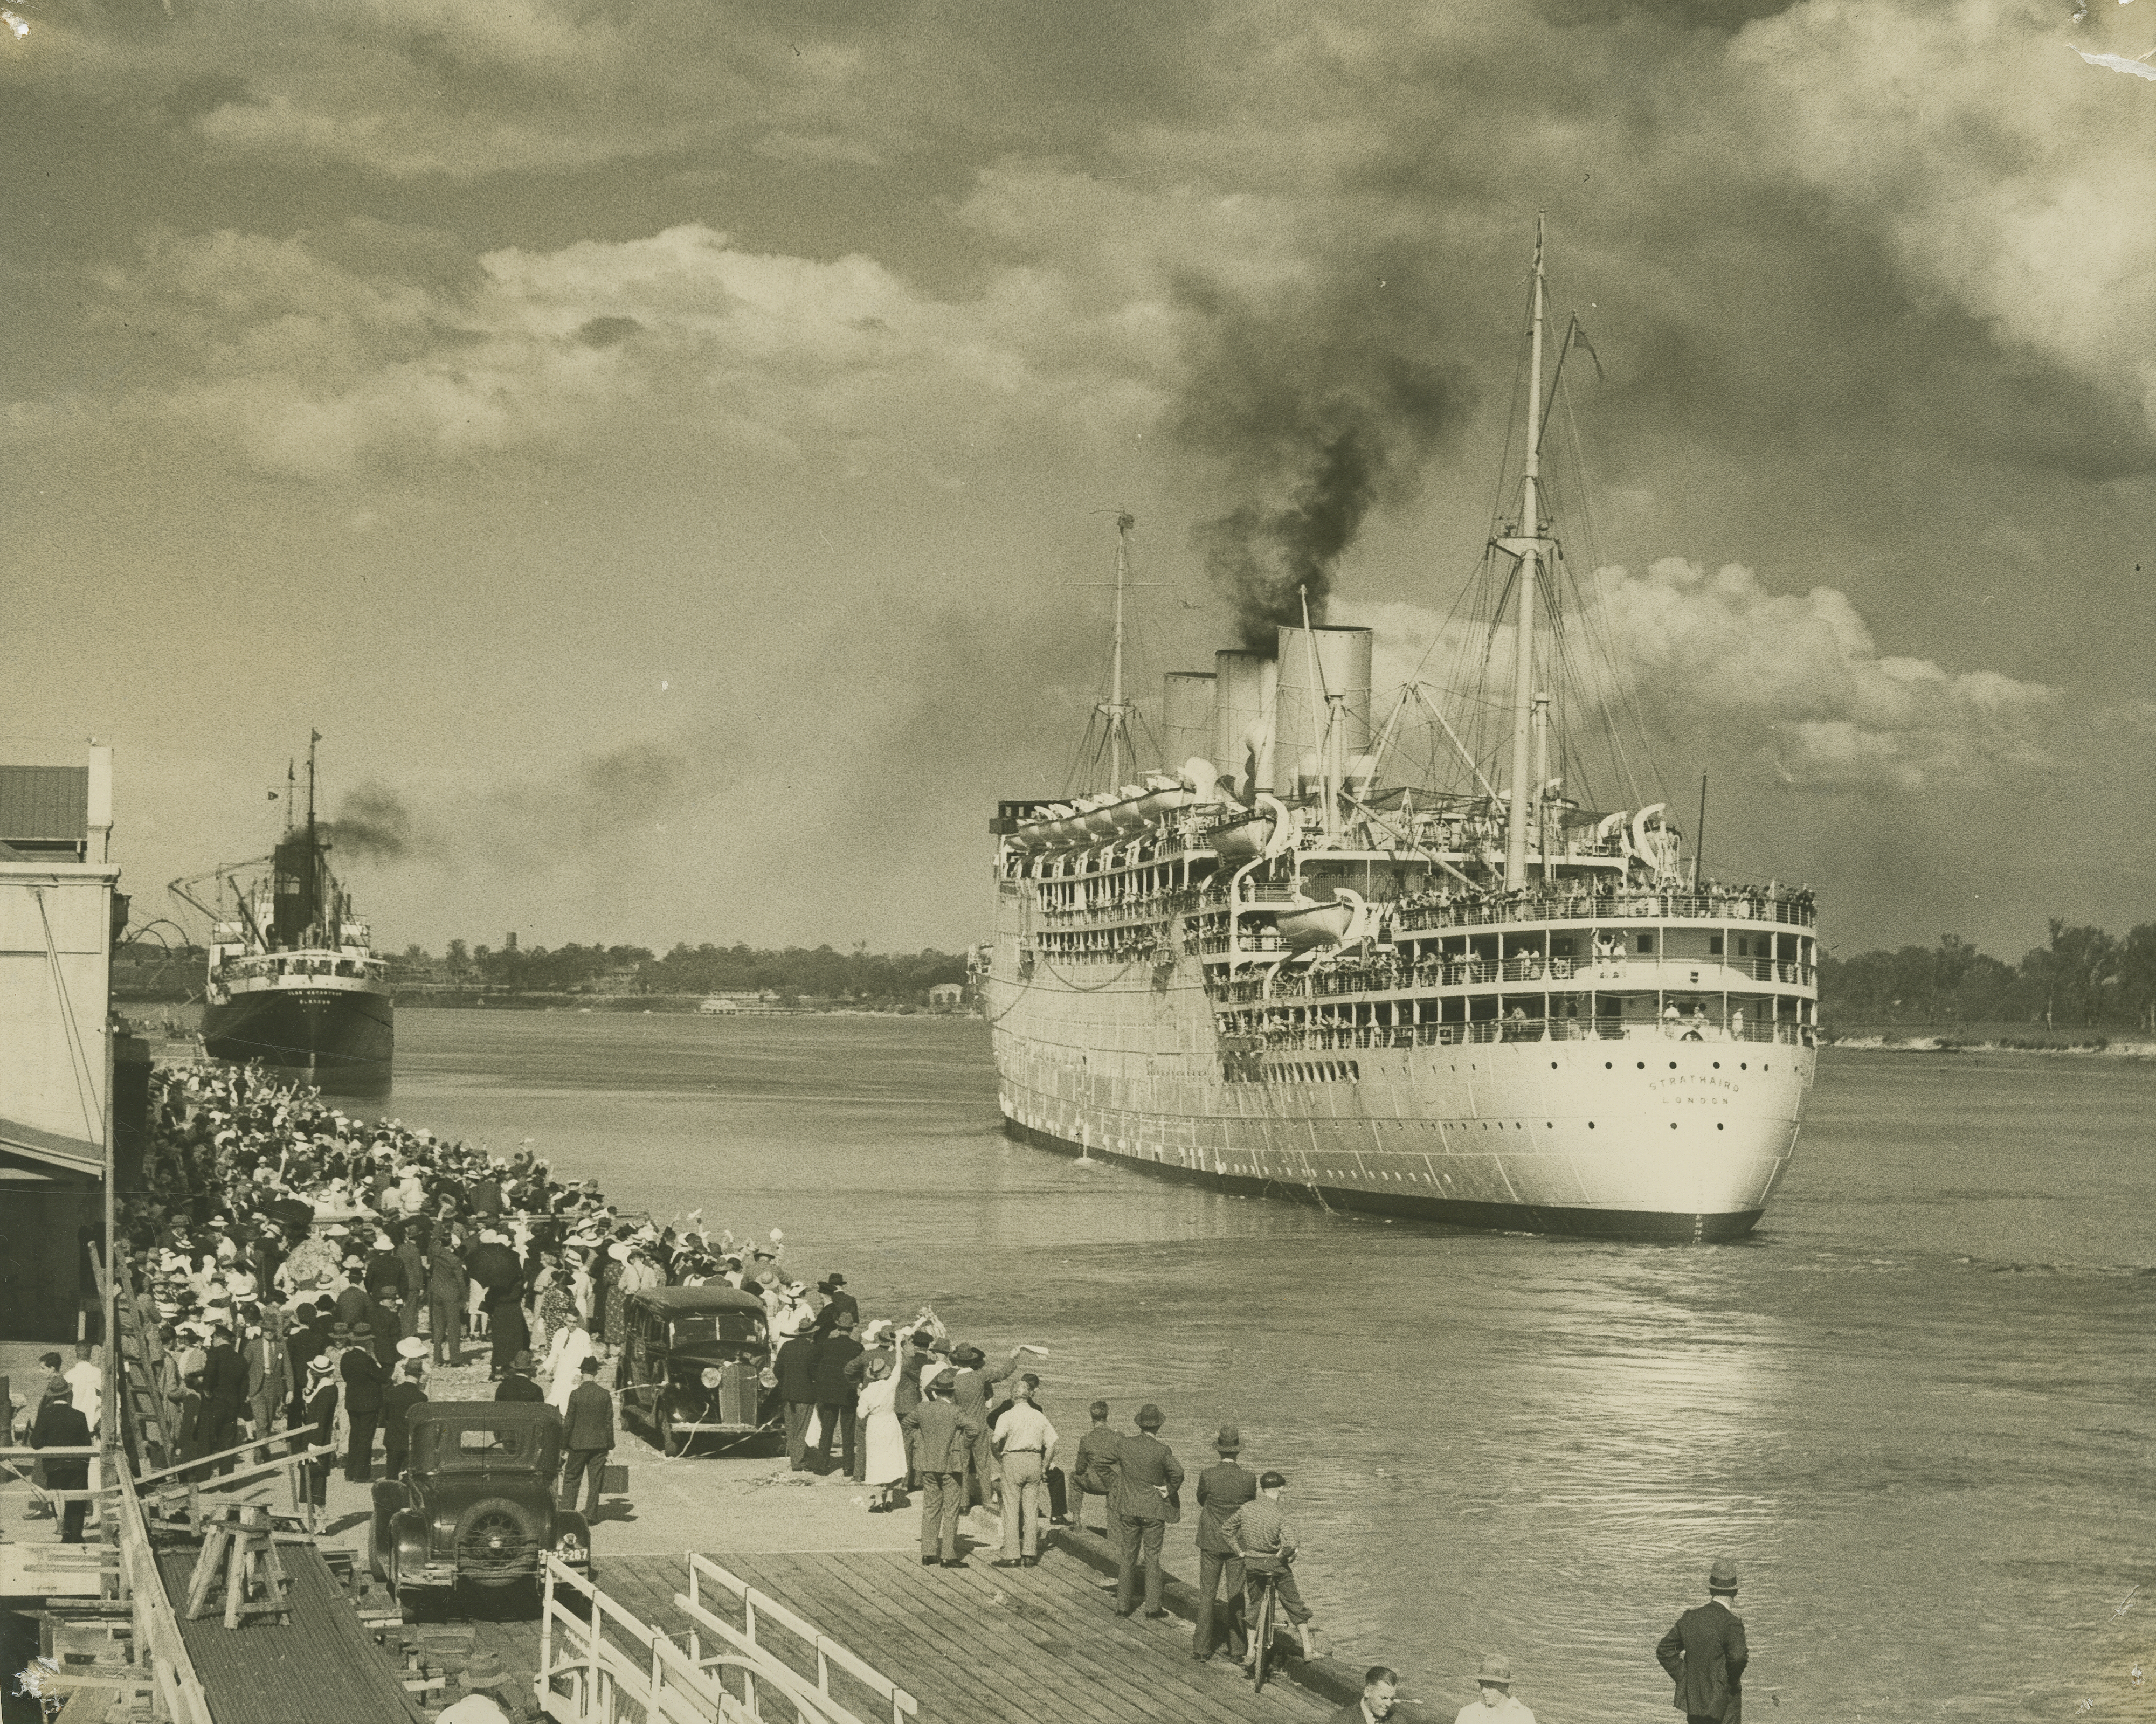 File:StateLibQld 1 250796 Cruise ship Strathaird leaving 